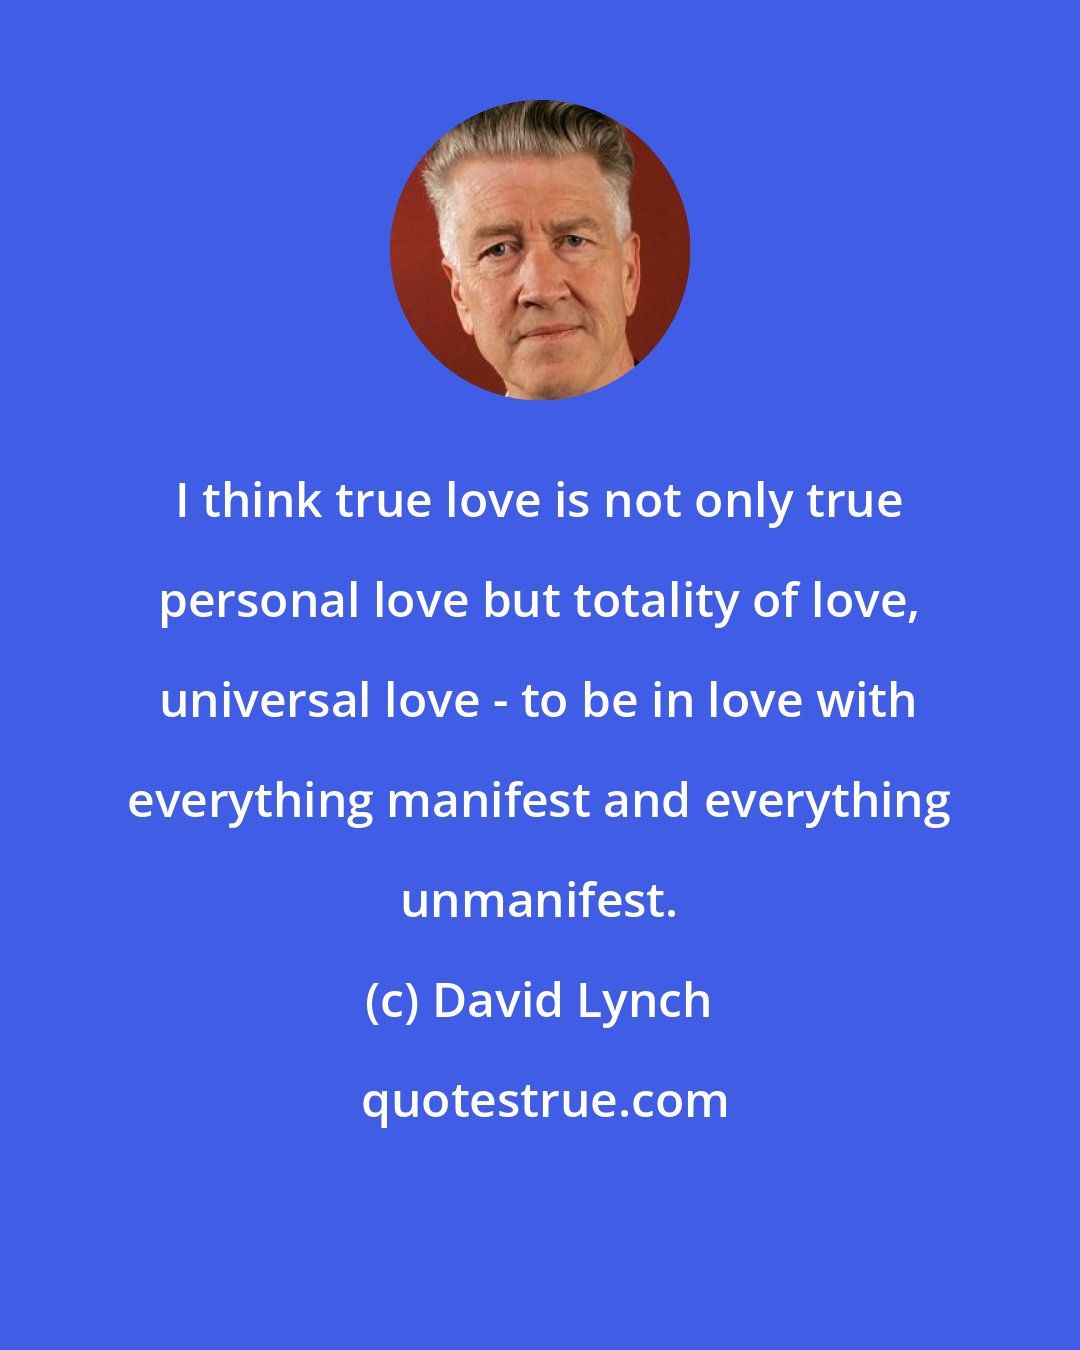 David Lynch: I think true love is not only true personal love but totality of love, universal love - to be in love with everything manifest and everything unmanifest.